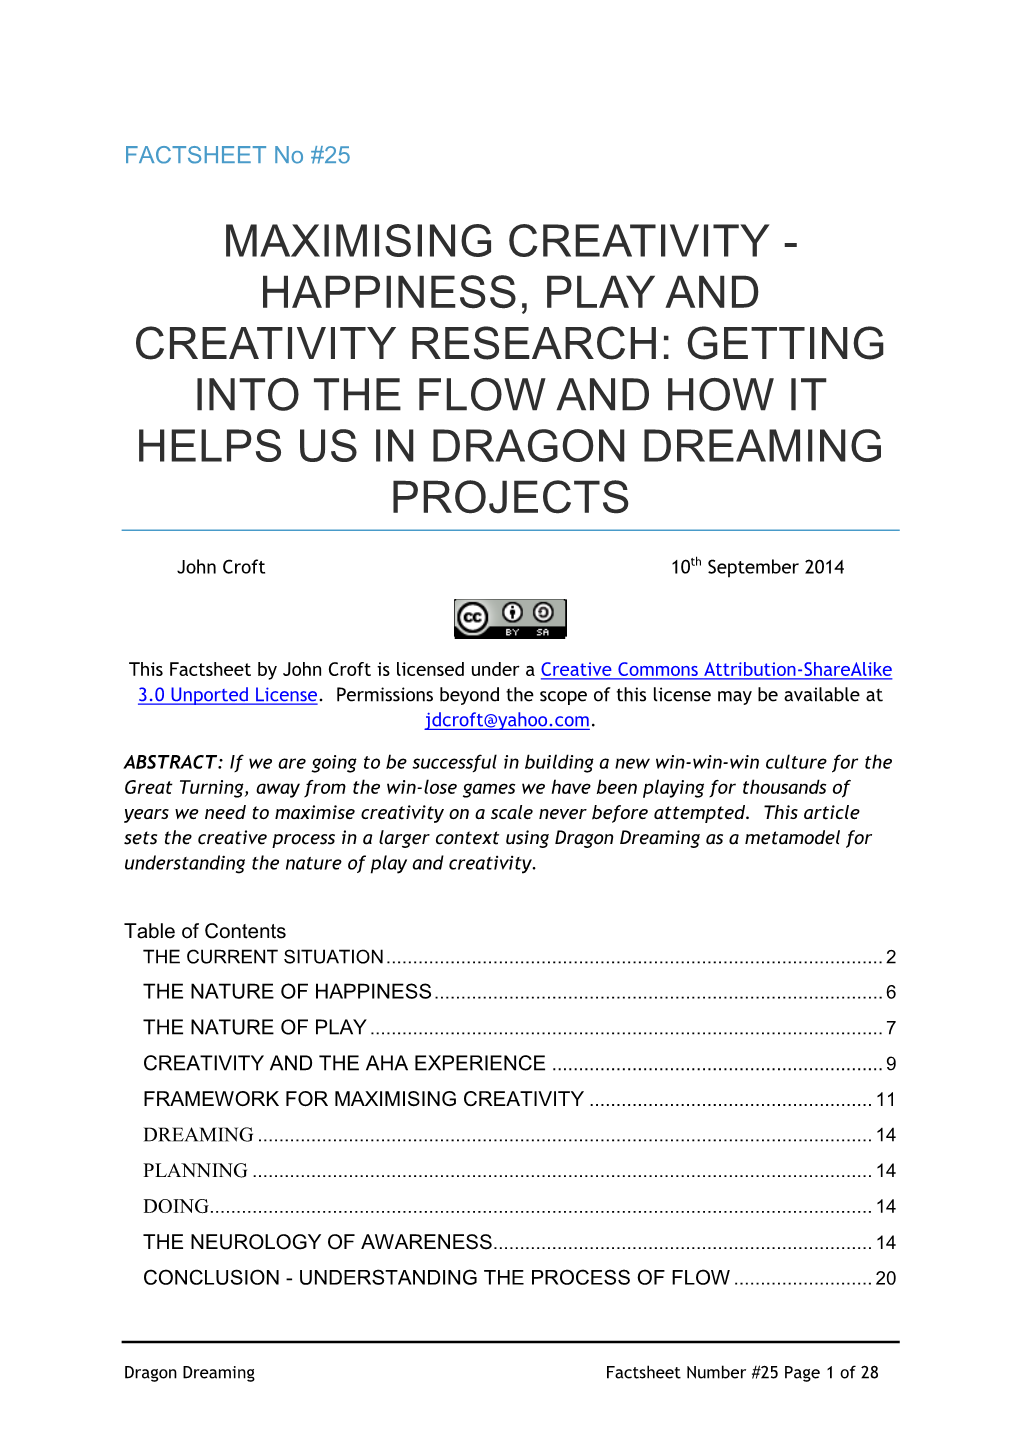 Maximising Creativity - Happiness, Play and Creativity Research: Getting Into the Flow and How It Helps Us in Dragon Dreaming Projects